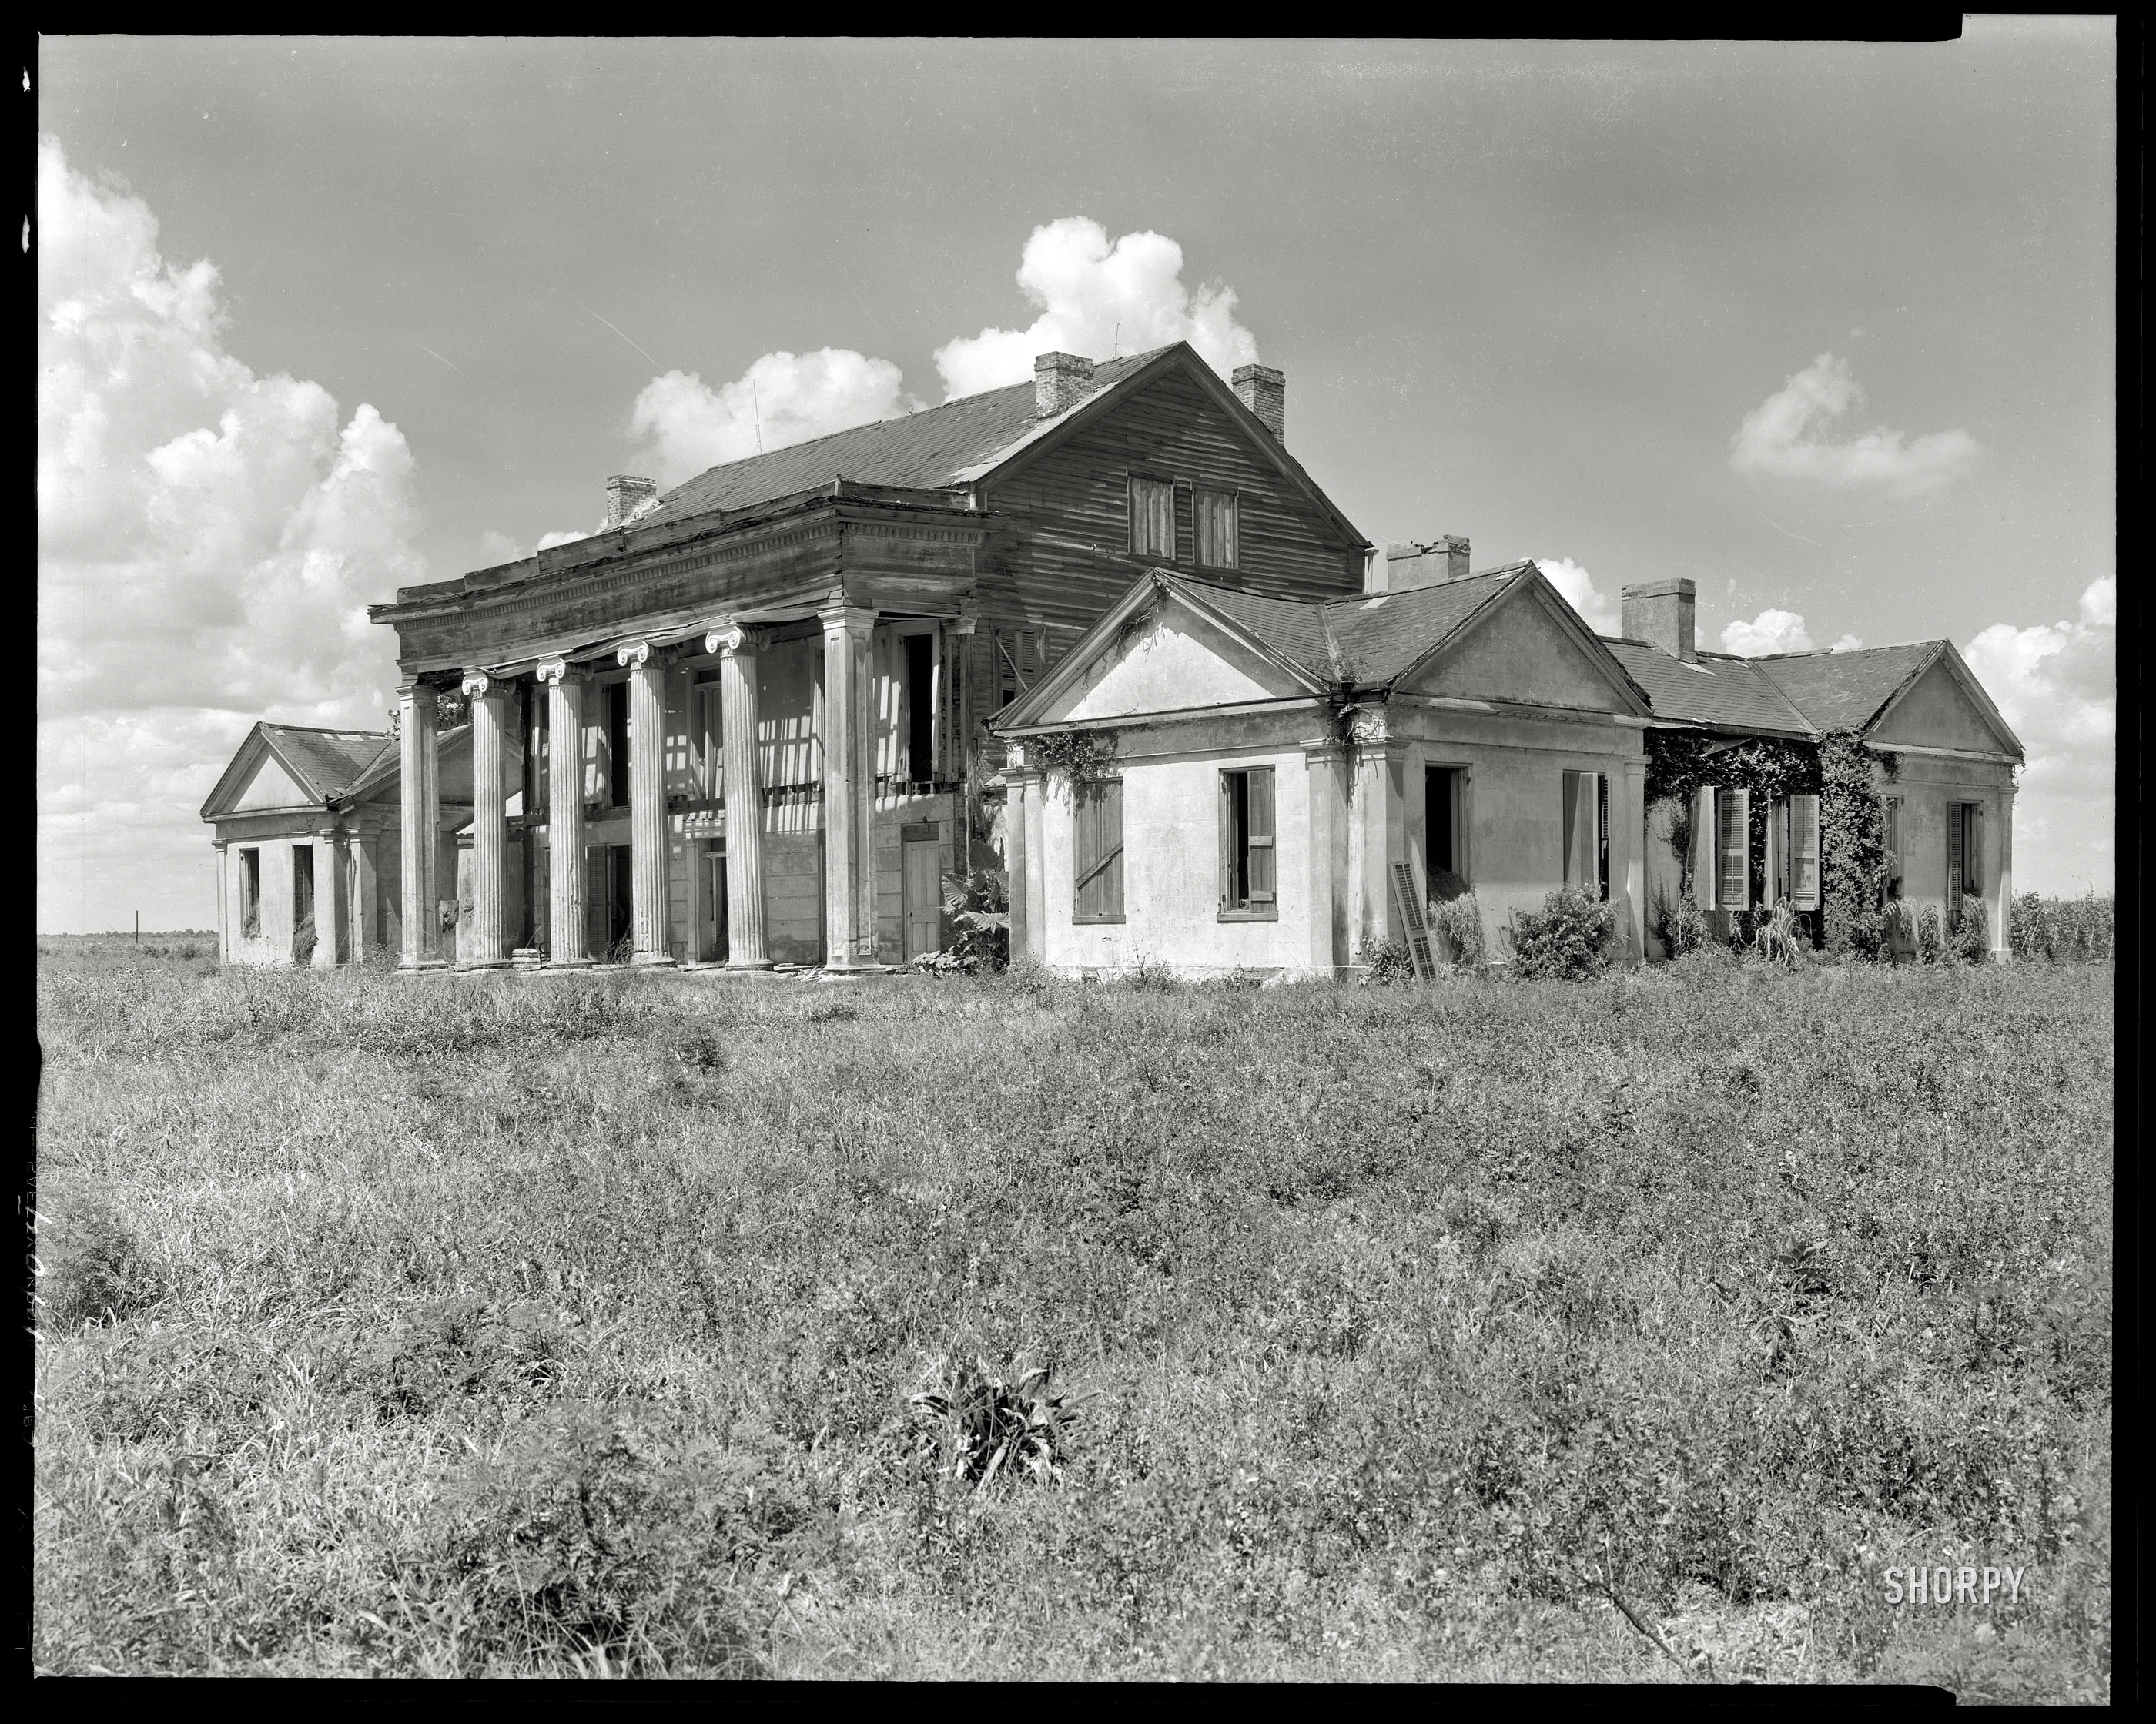 Assumption Parish, Louisiana, 1938. "Woodlawn Plantation, Napoleonville vicinity. Built 1835 by Col. W.W. Pugh, first superintendent of schools in Louisiana." 8x10 inch negative by Frances Benjamin Johnston. View full size.